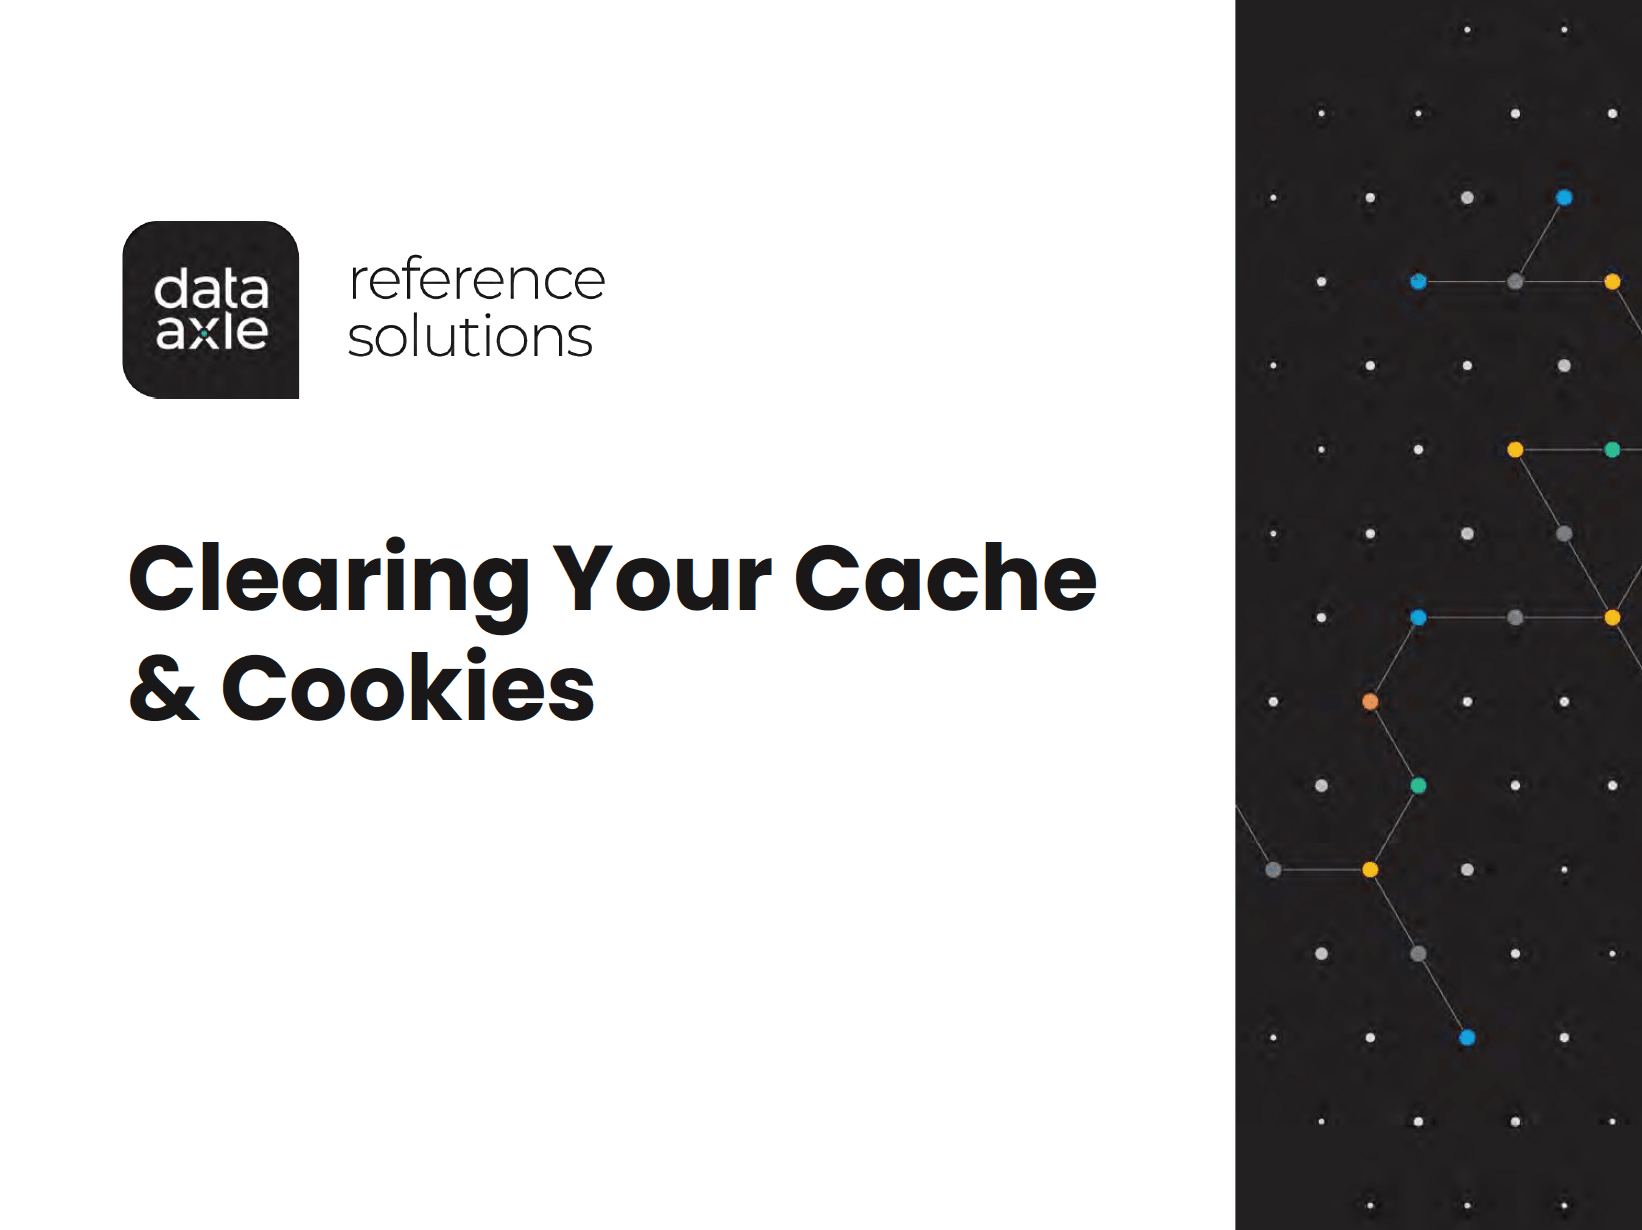 Clearing Your Cache & Cookies Training Guide